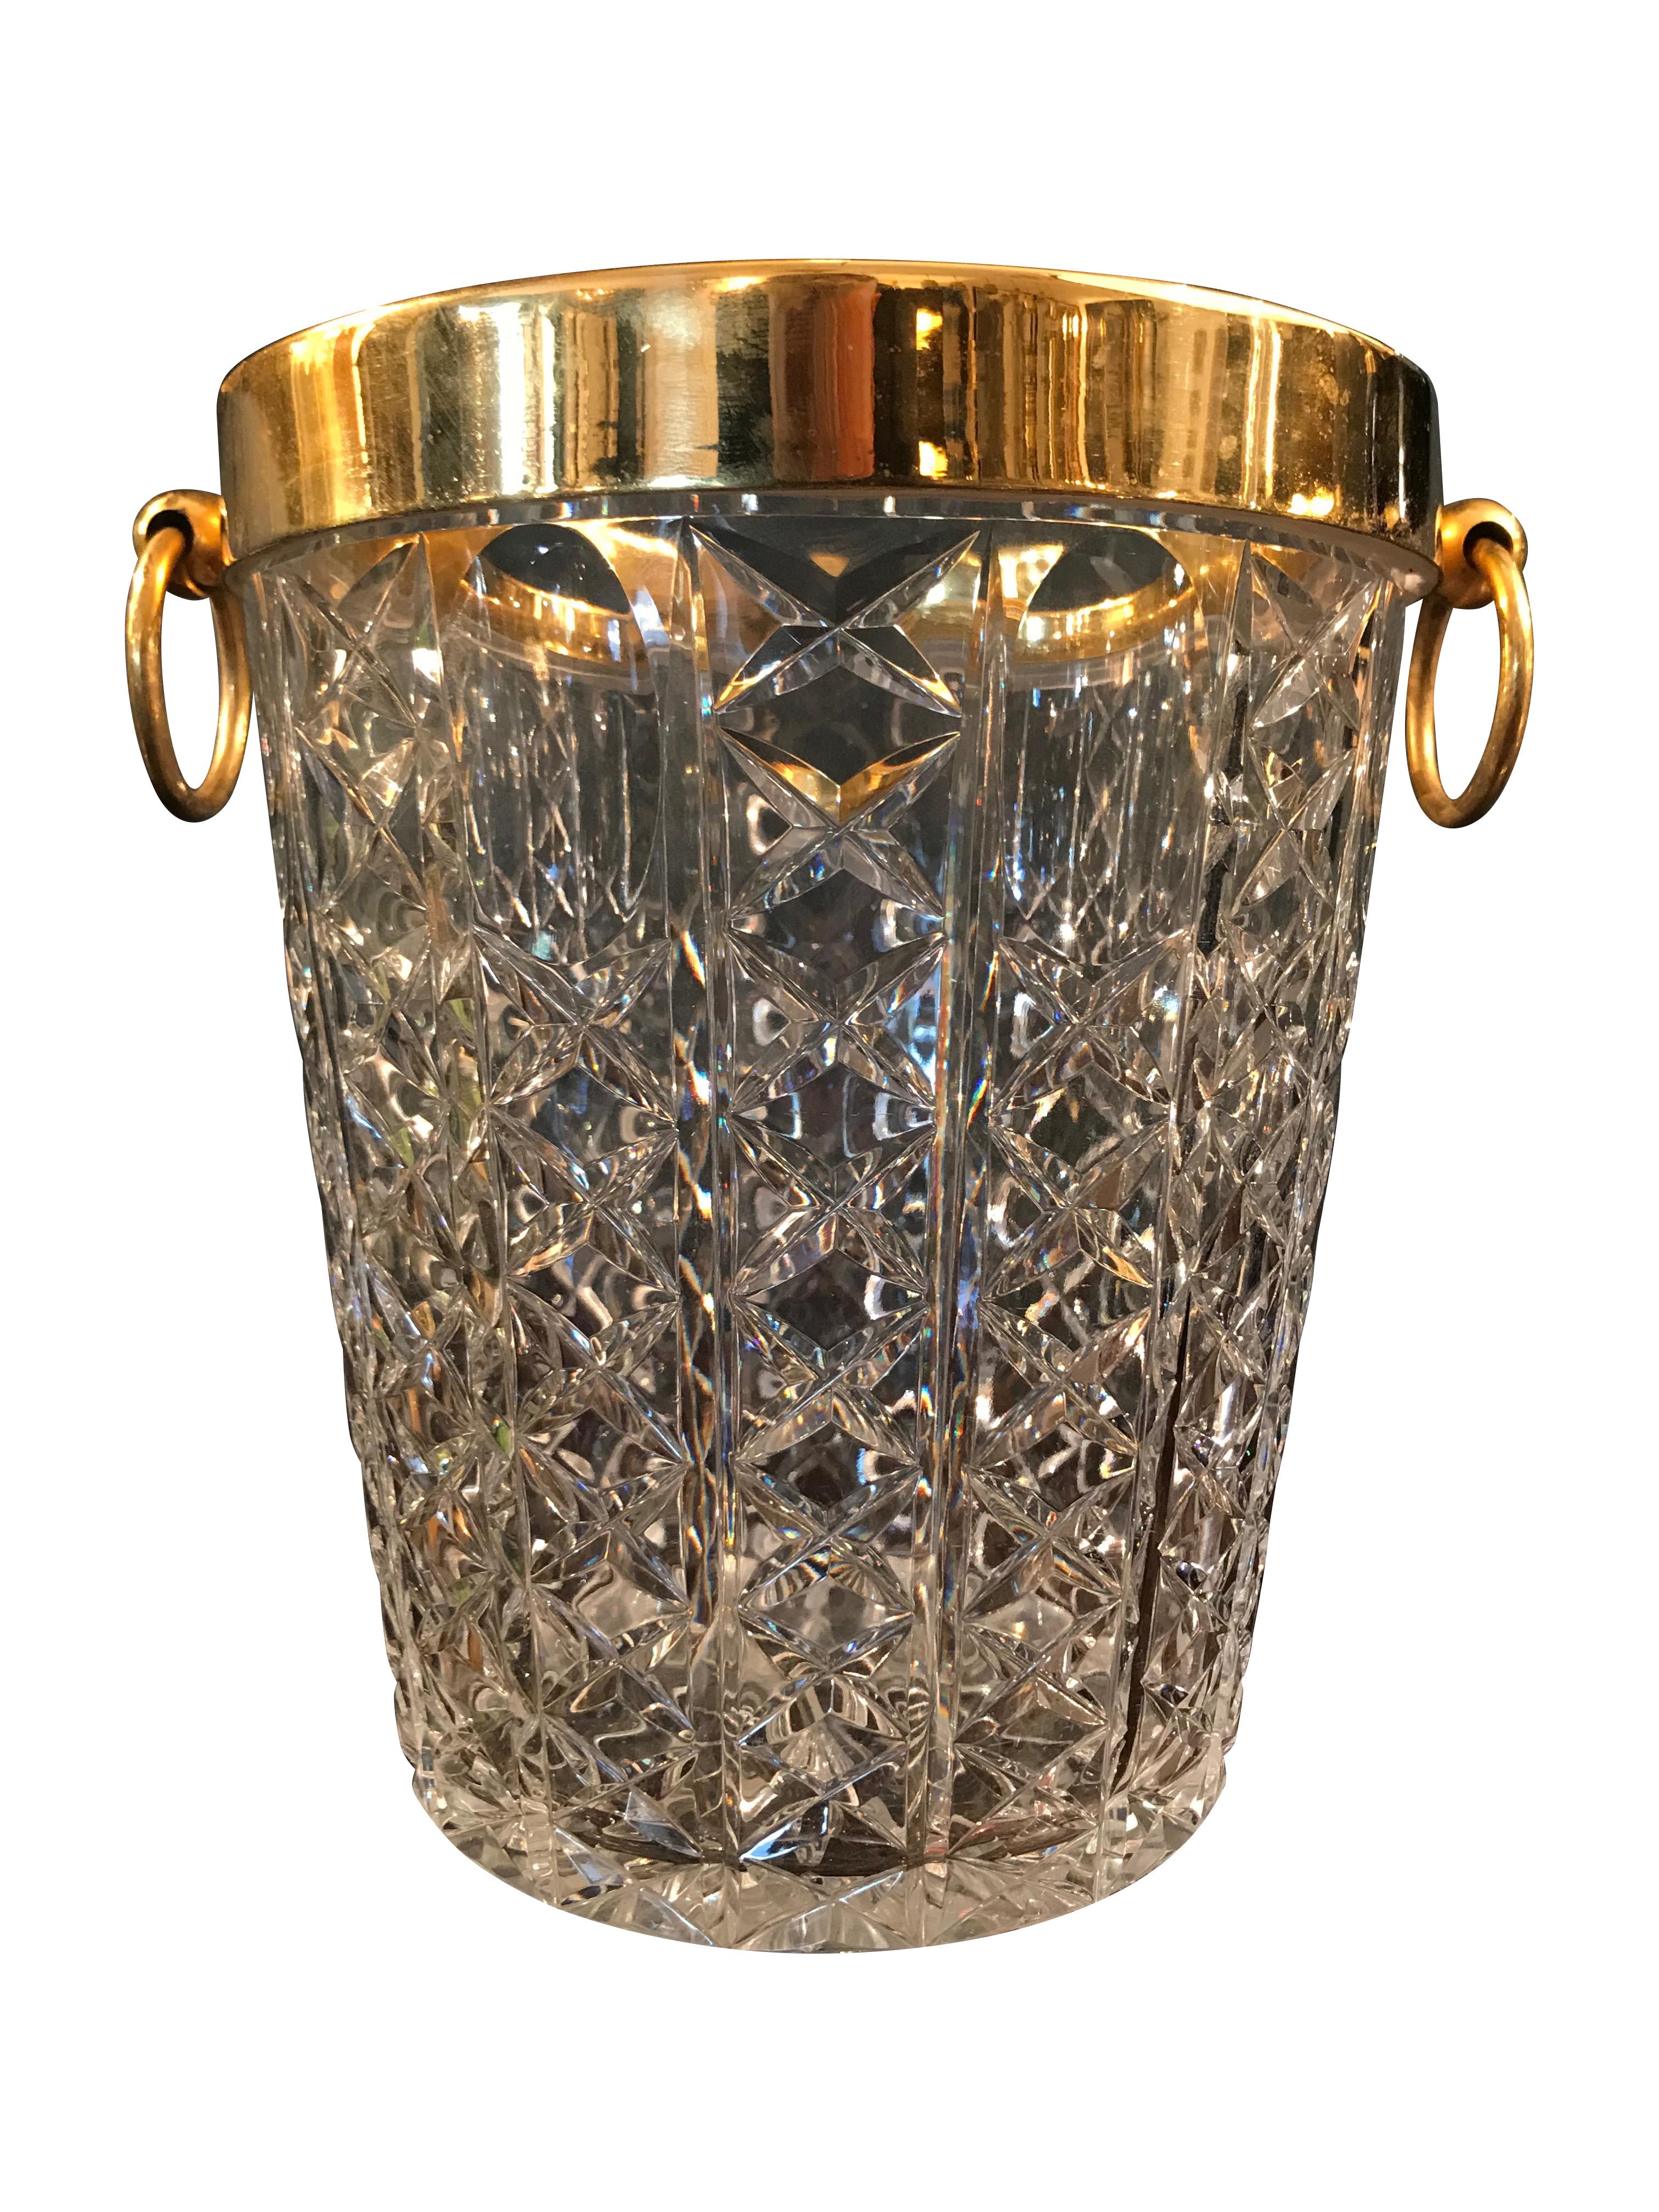 A Val St Lambert cut crystal champagne bucket with gold plated rim and hooped handles.